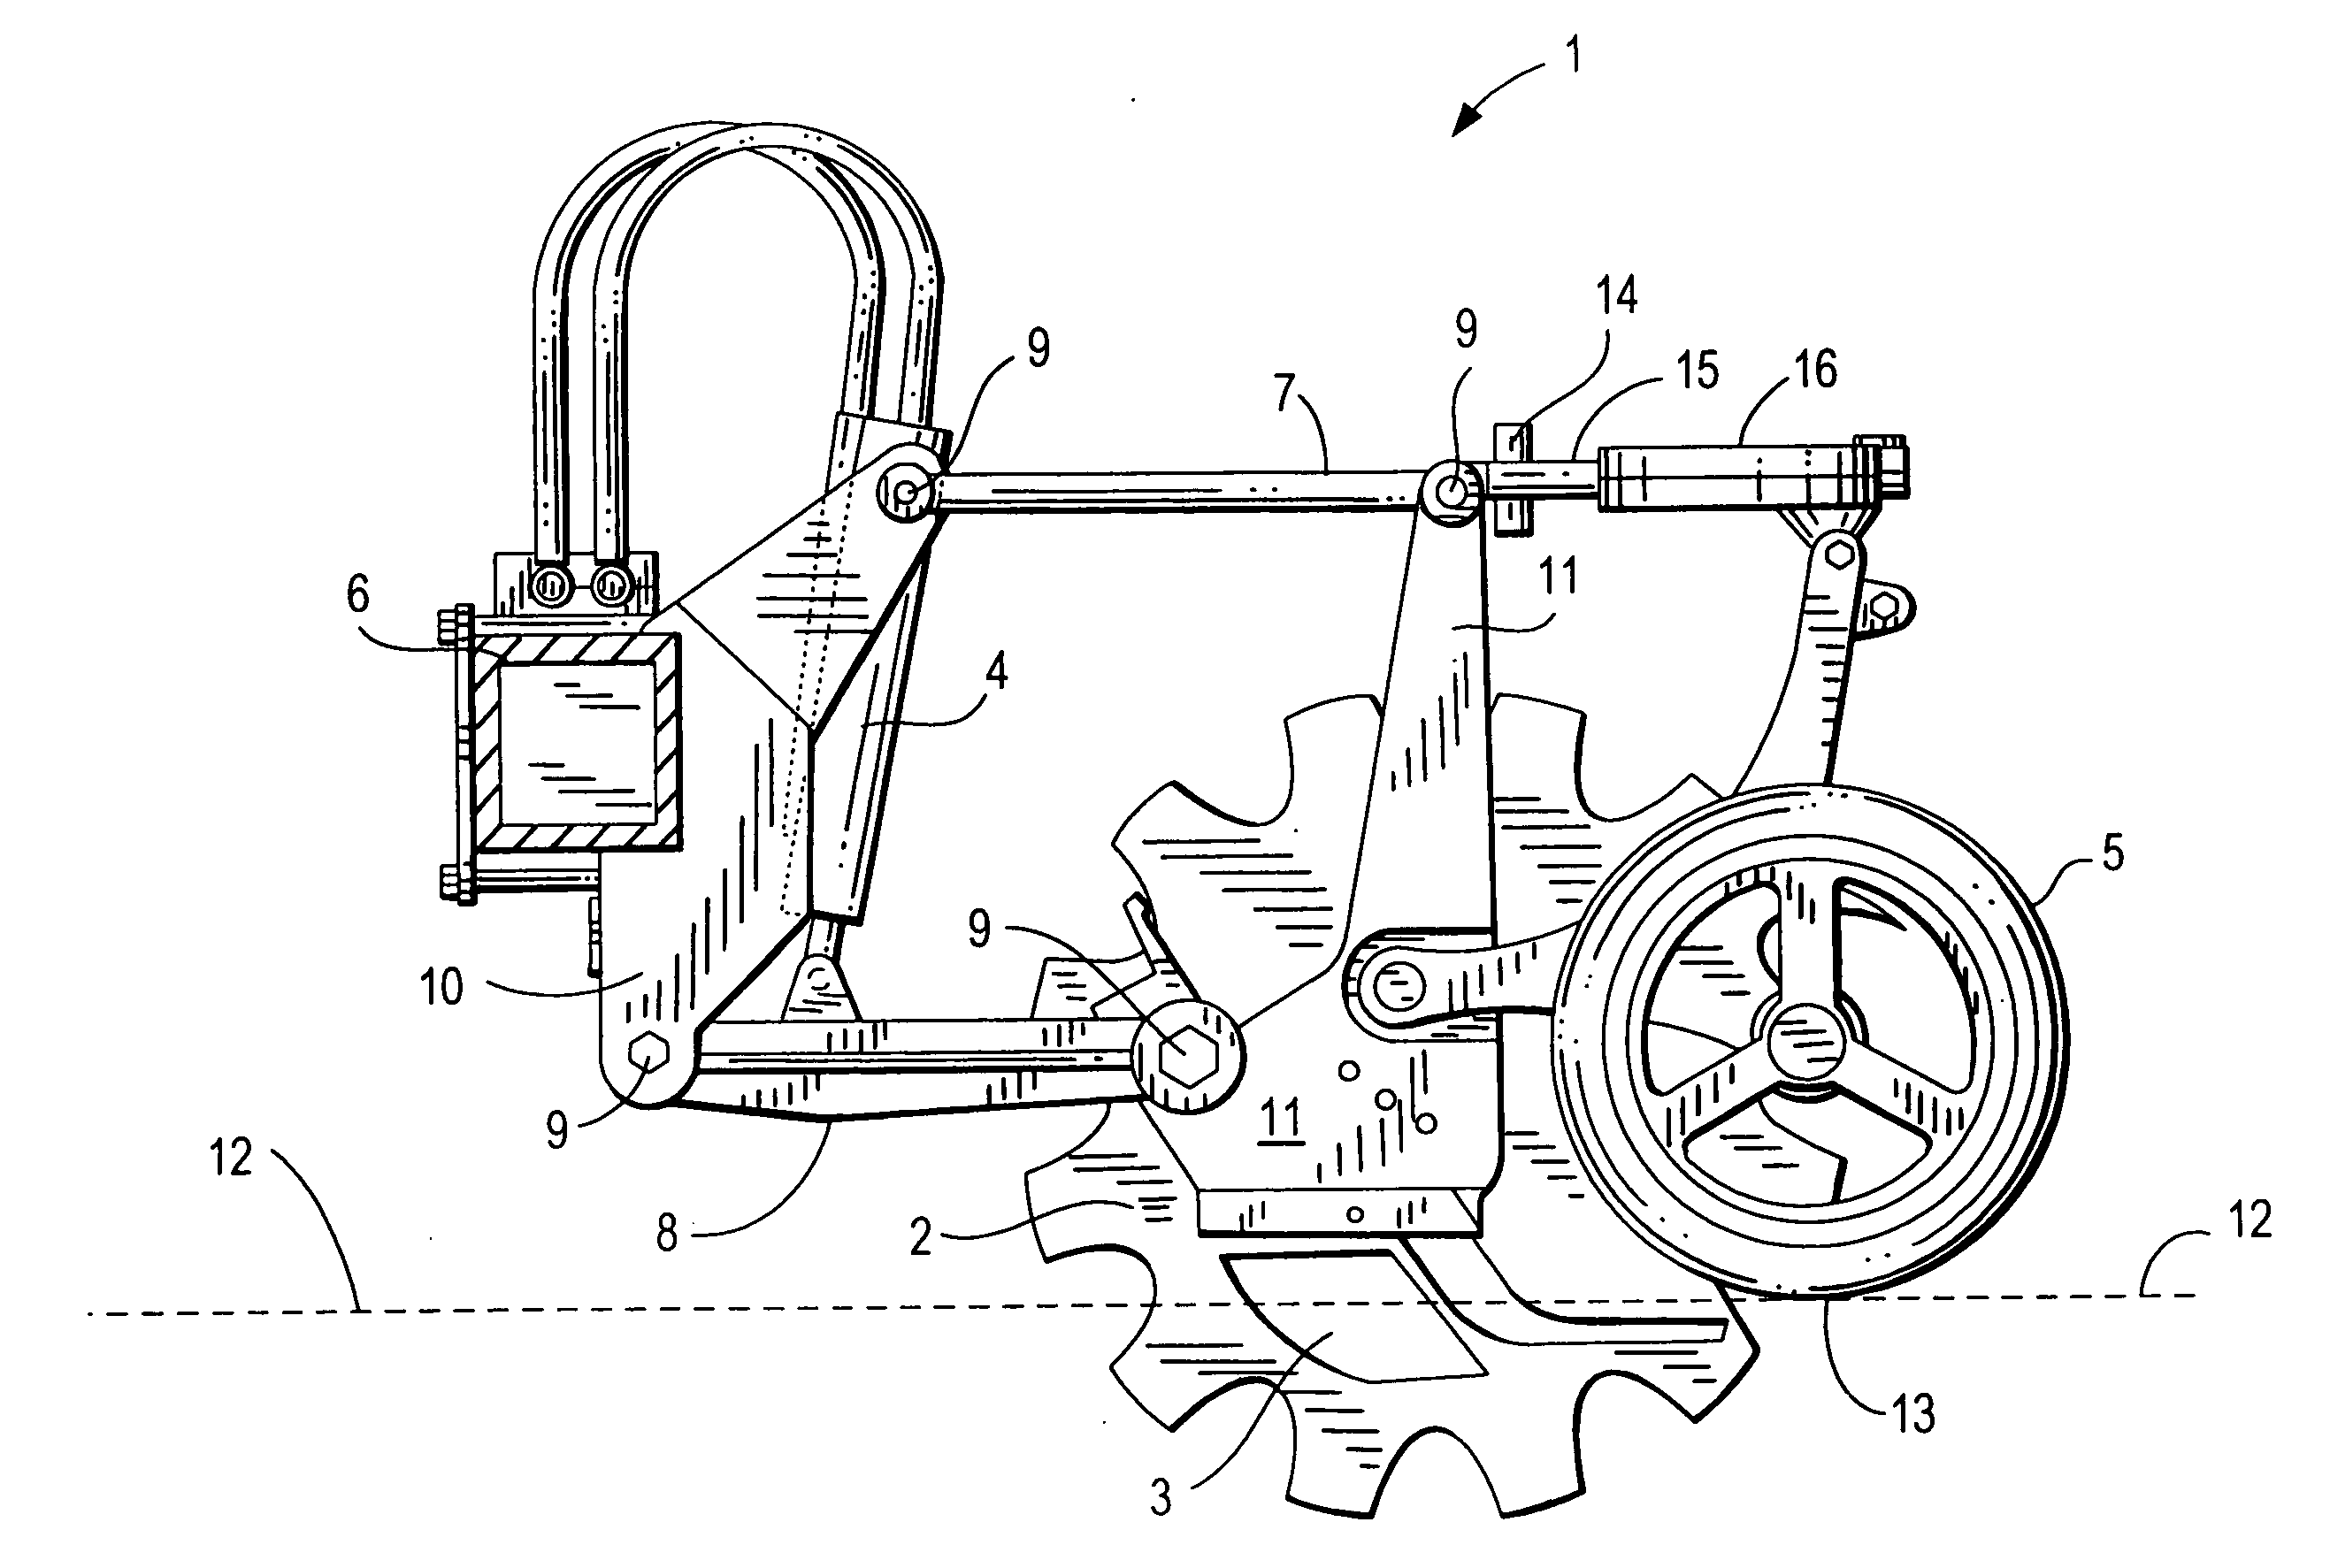 Ground opening device